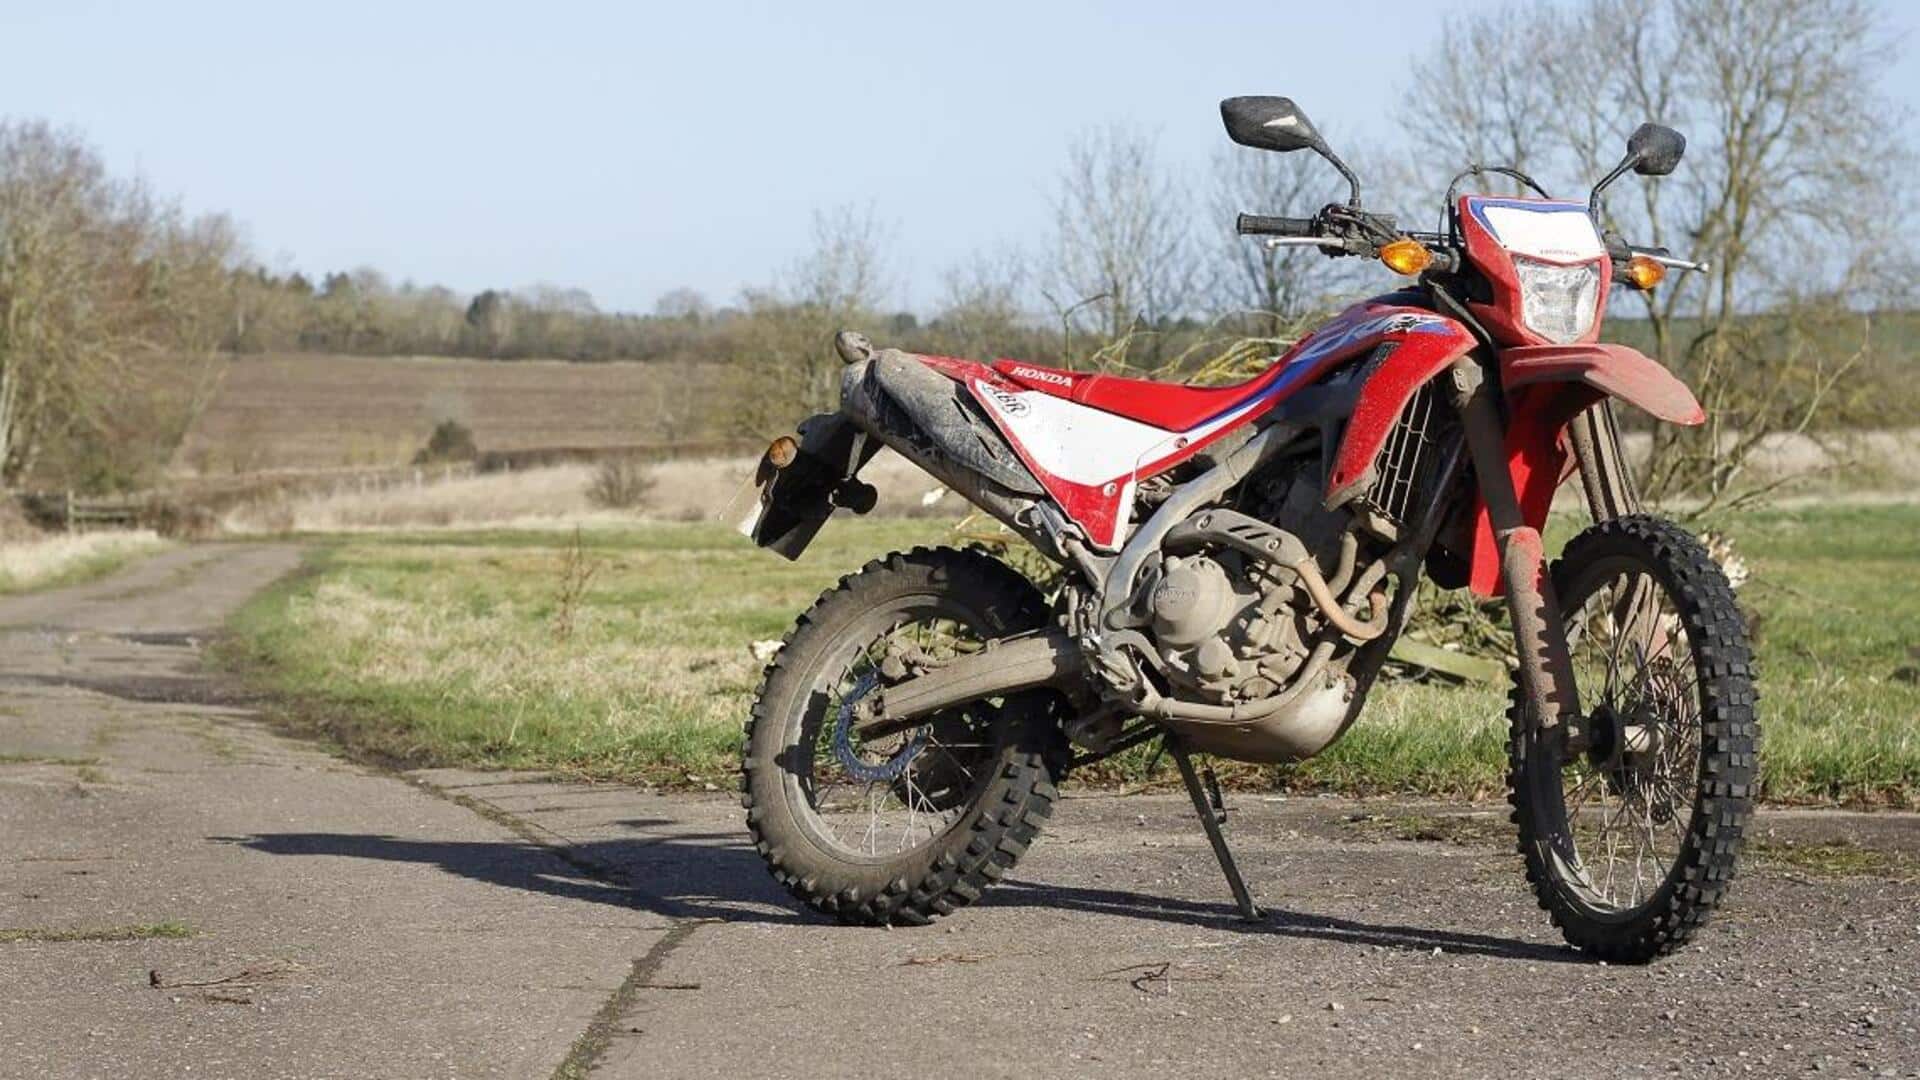 Honda teases CRF 300L, Rally off-road bikes for India